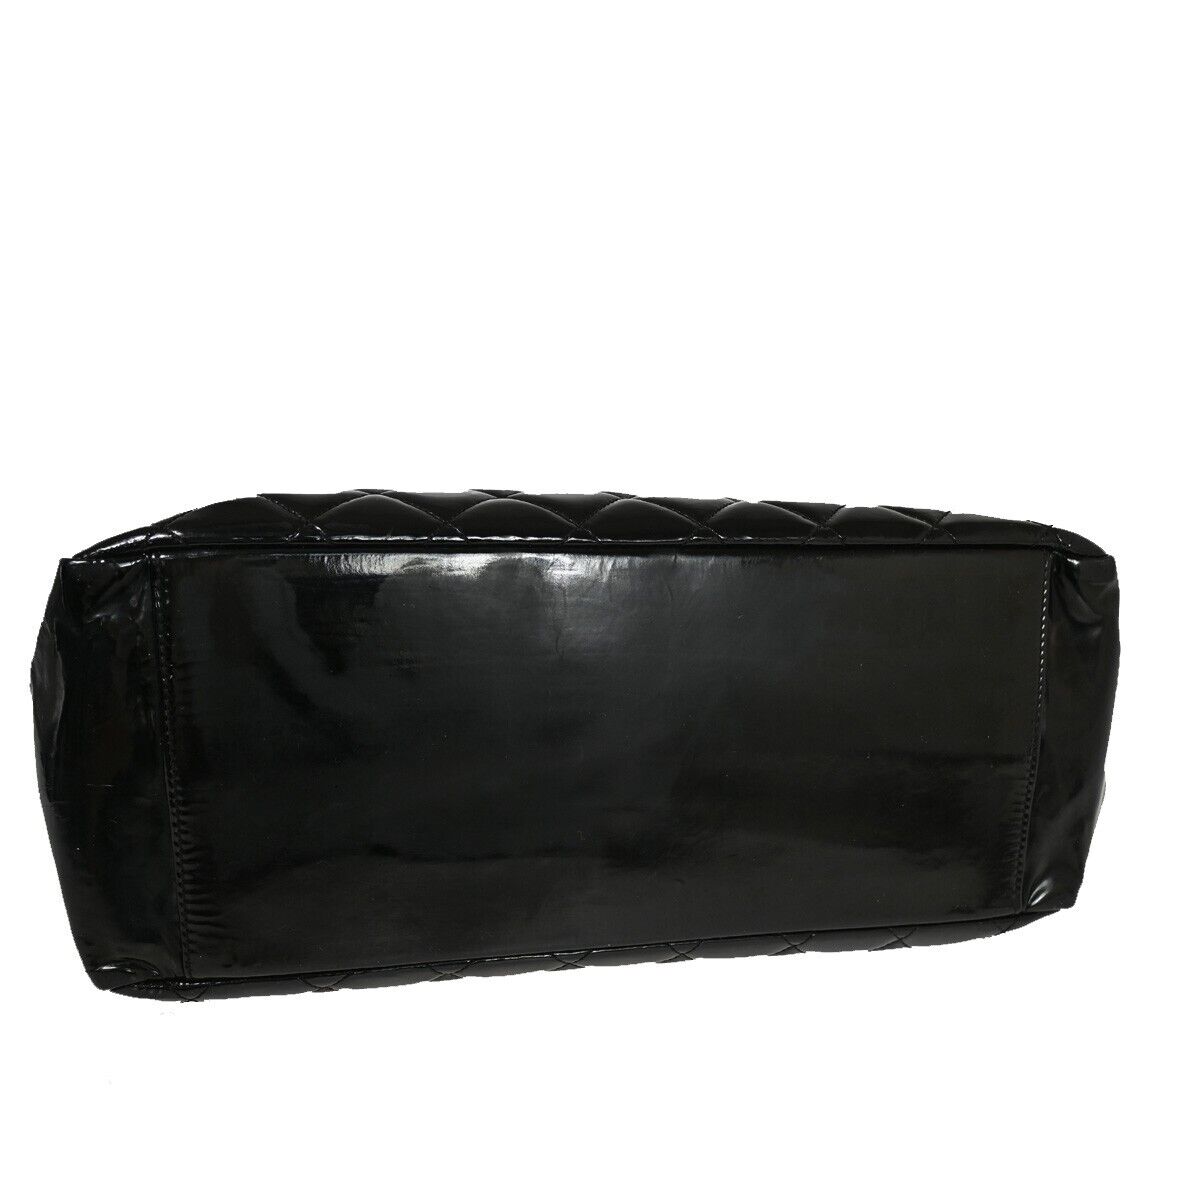 Chanel Grand Shopping Black Patent Leather Shoulder Bag (Pre-Owned)